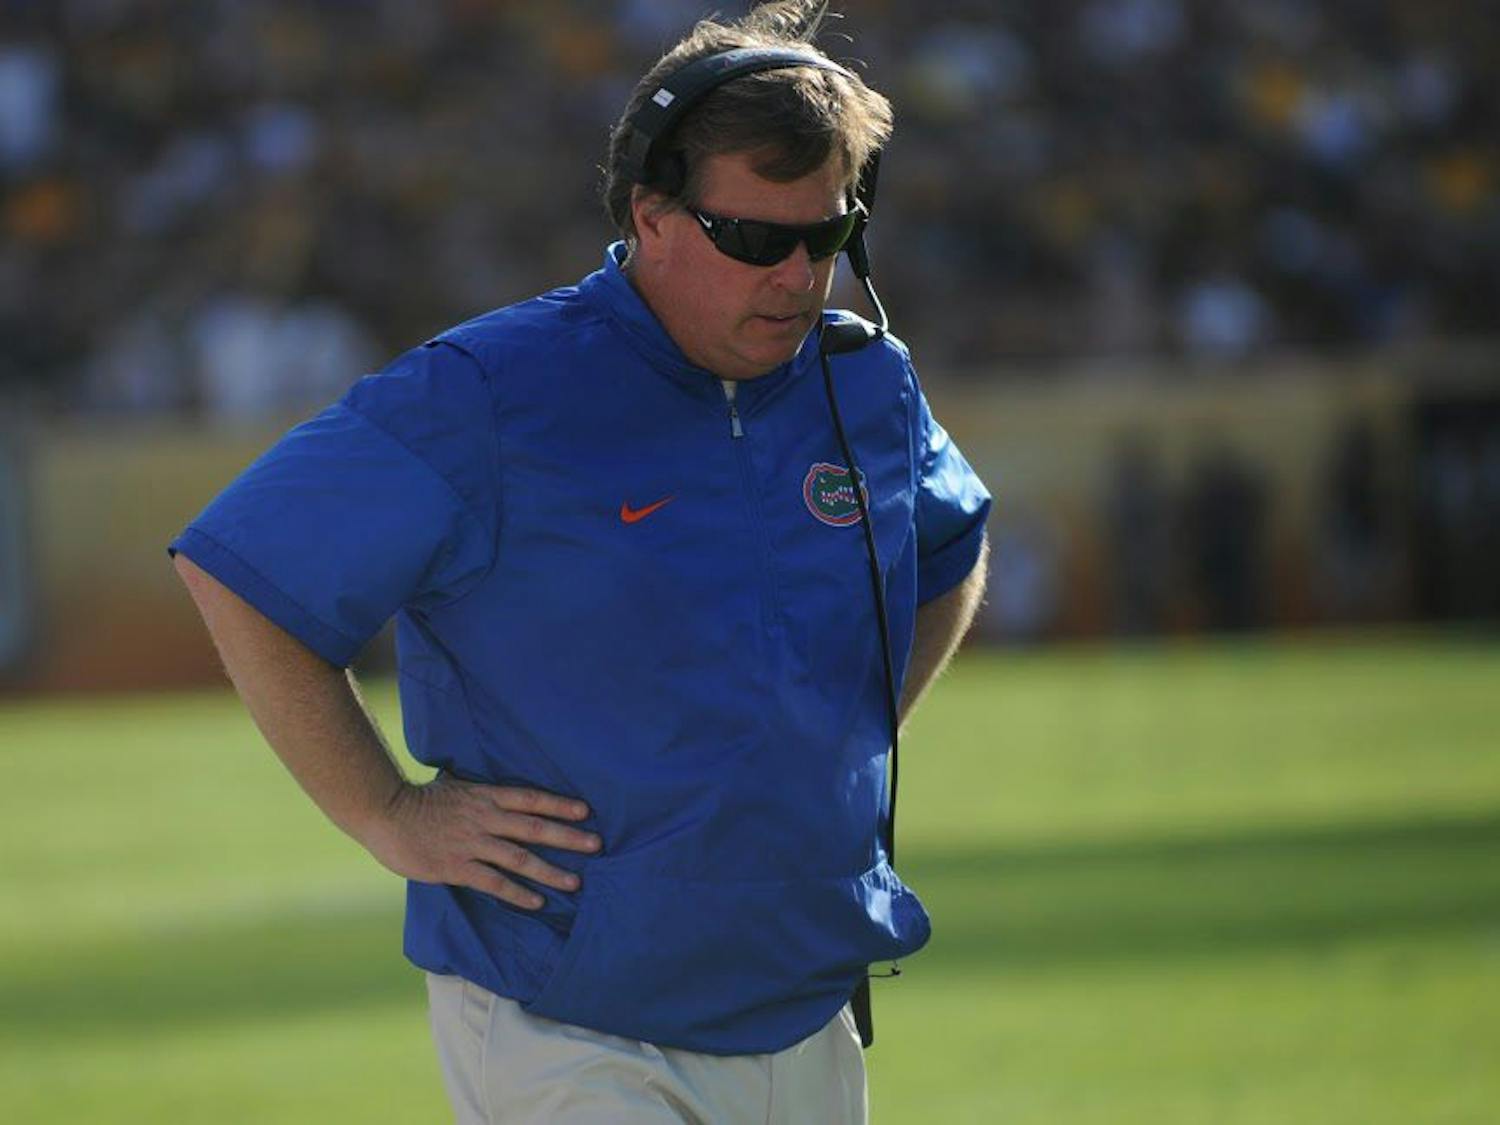 UF coach Jim McElwain looks down in disapproval during Florida's 30-3 win over Iowa in the Outback Bowl on Jan. 2, 2017, at Raymond James Stadium in Tampa.&nbsp;